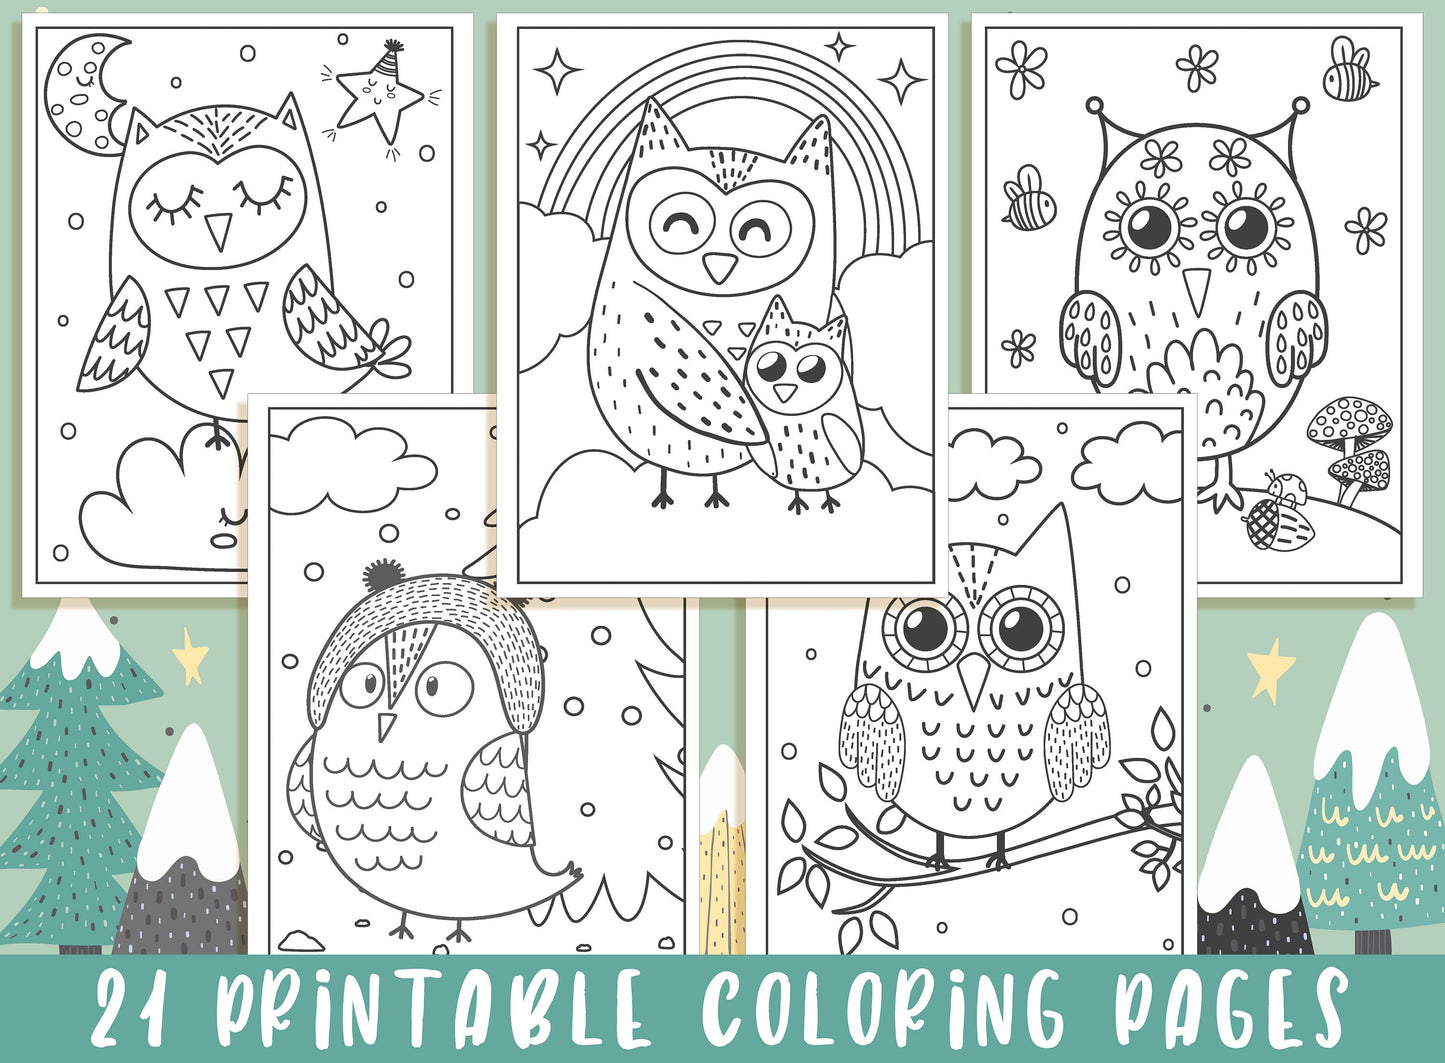 Owl Coloring Pages - 21 Printable Owl Coloring Pages for Kids, Boys, Girls, Teens, Owl Birthday Party Activity - Instant Download.